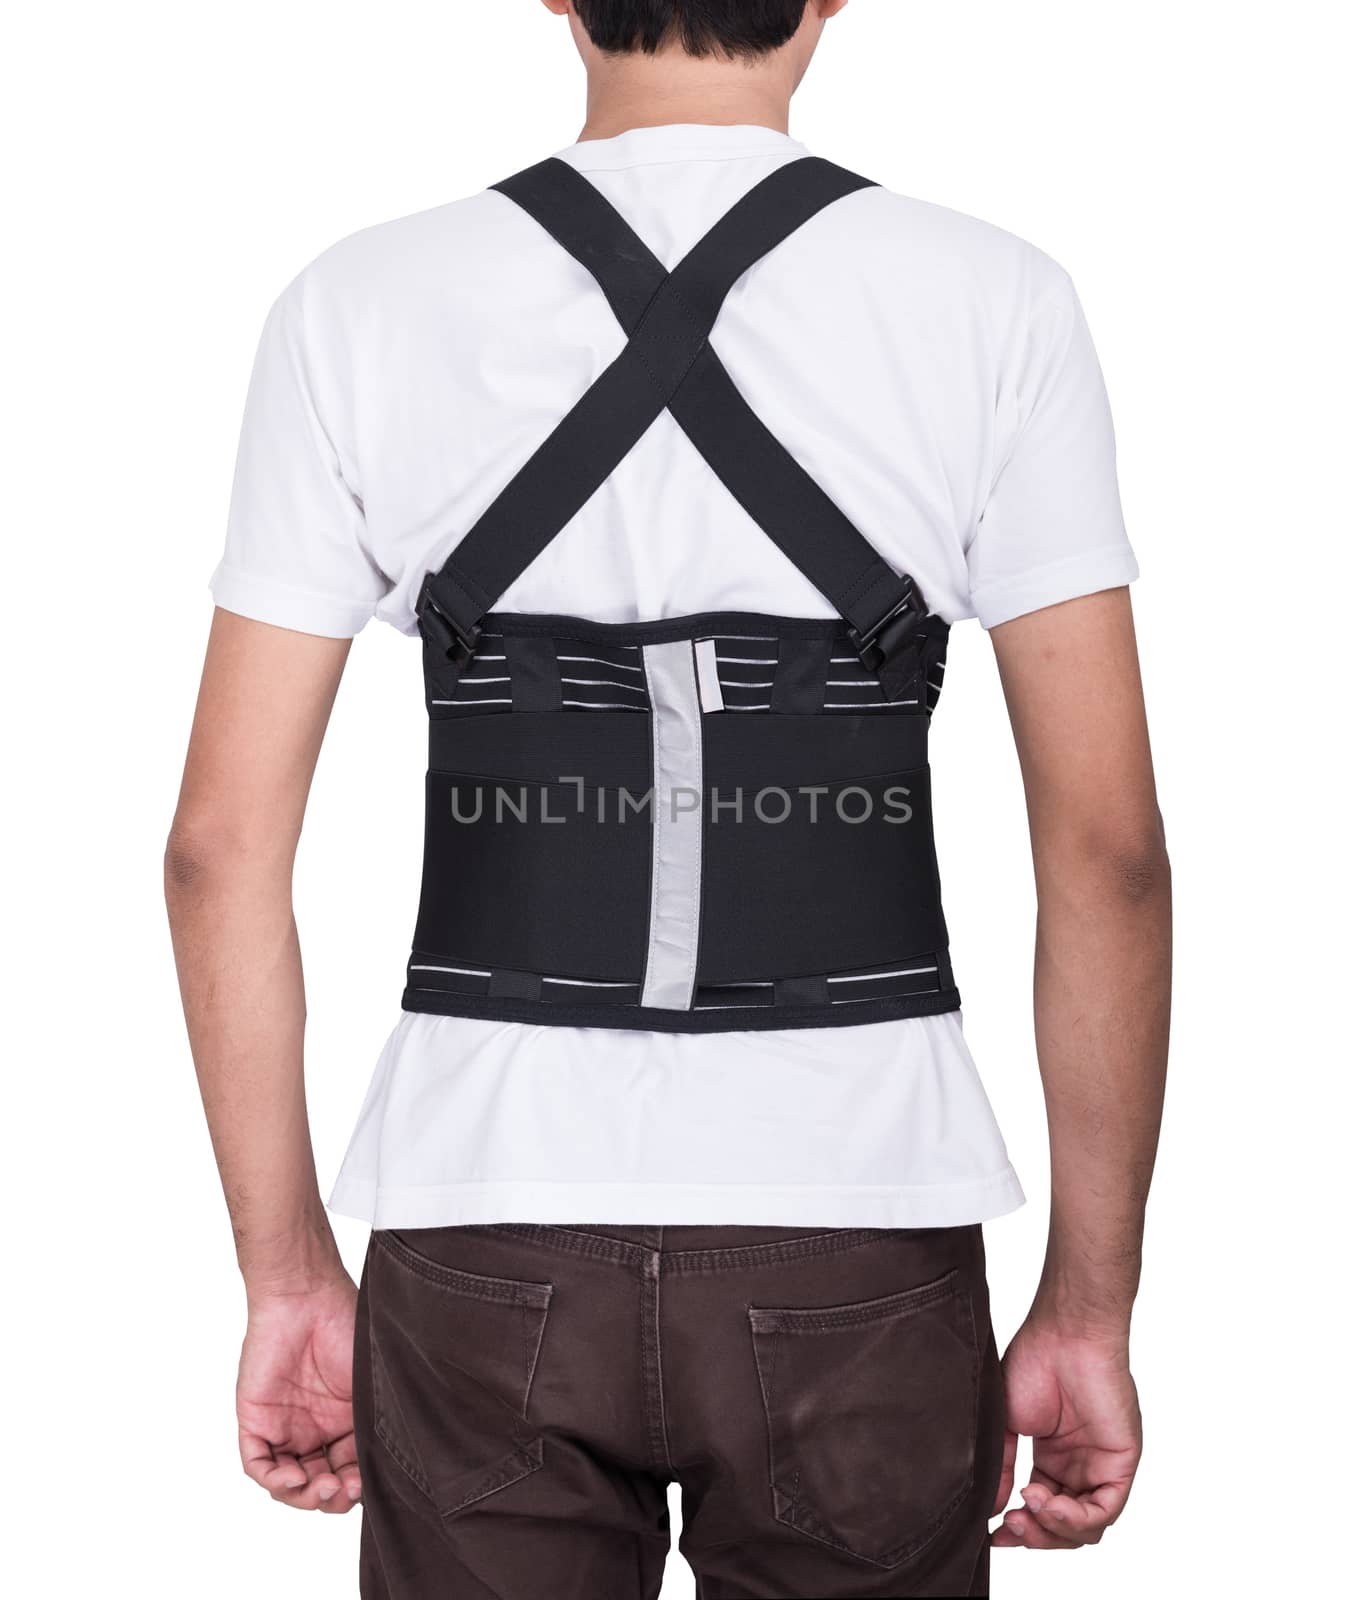 Worker man wear back support belts isolate ob white background